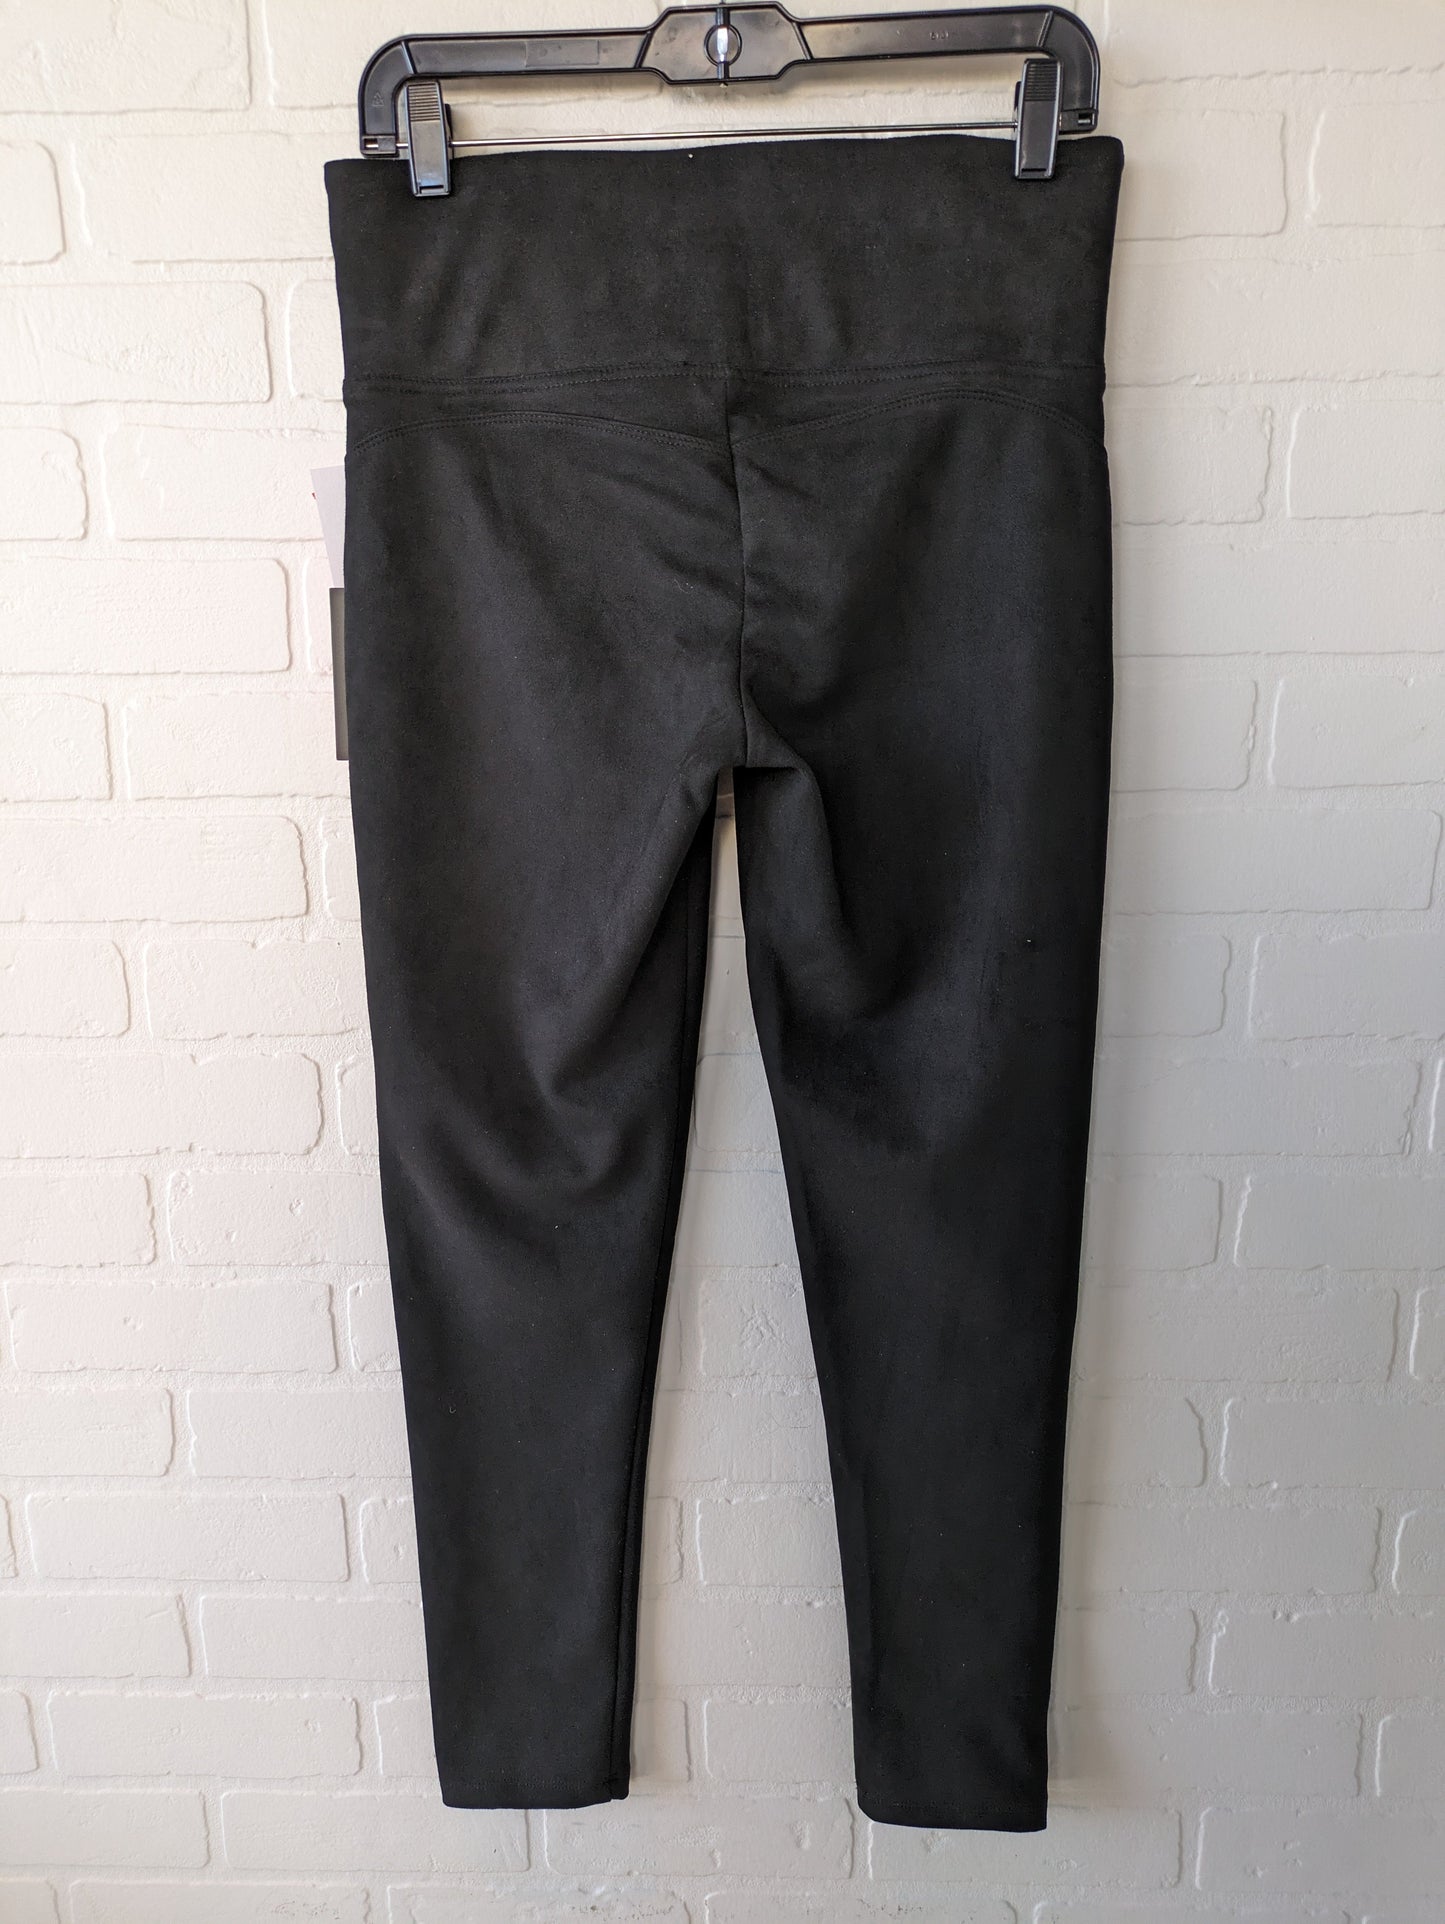 Pants Ankle By Vince Camuto  Size: 6